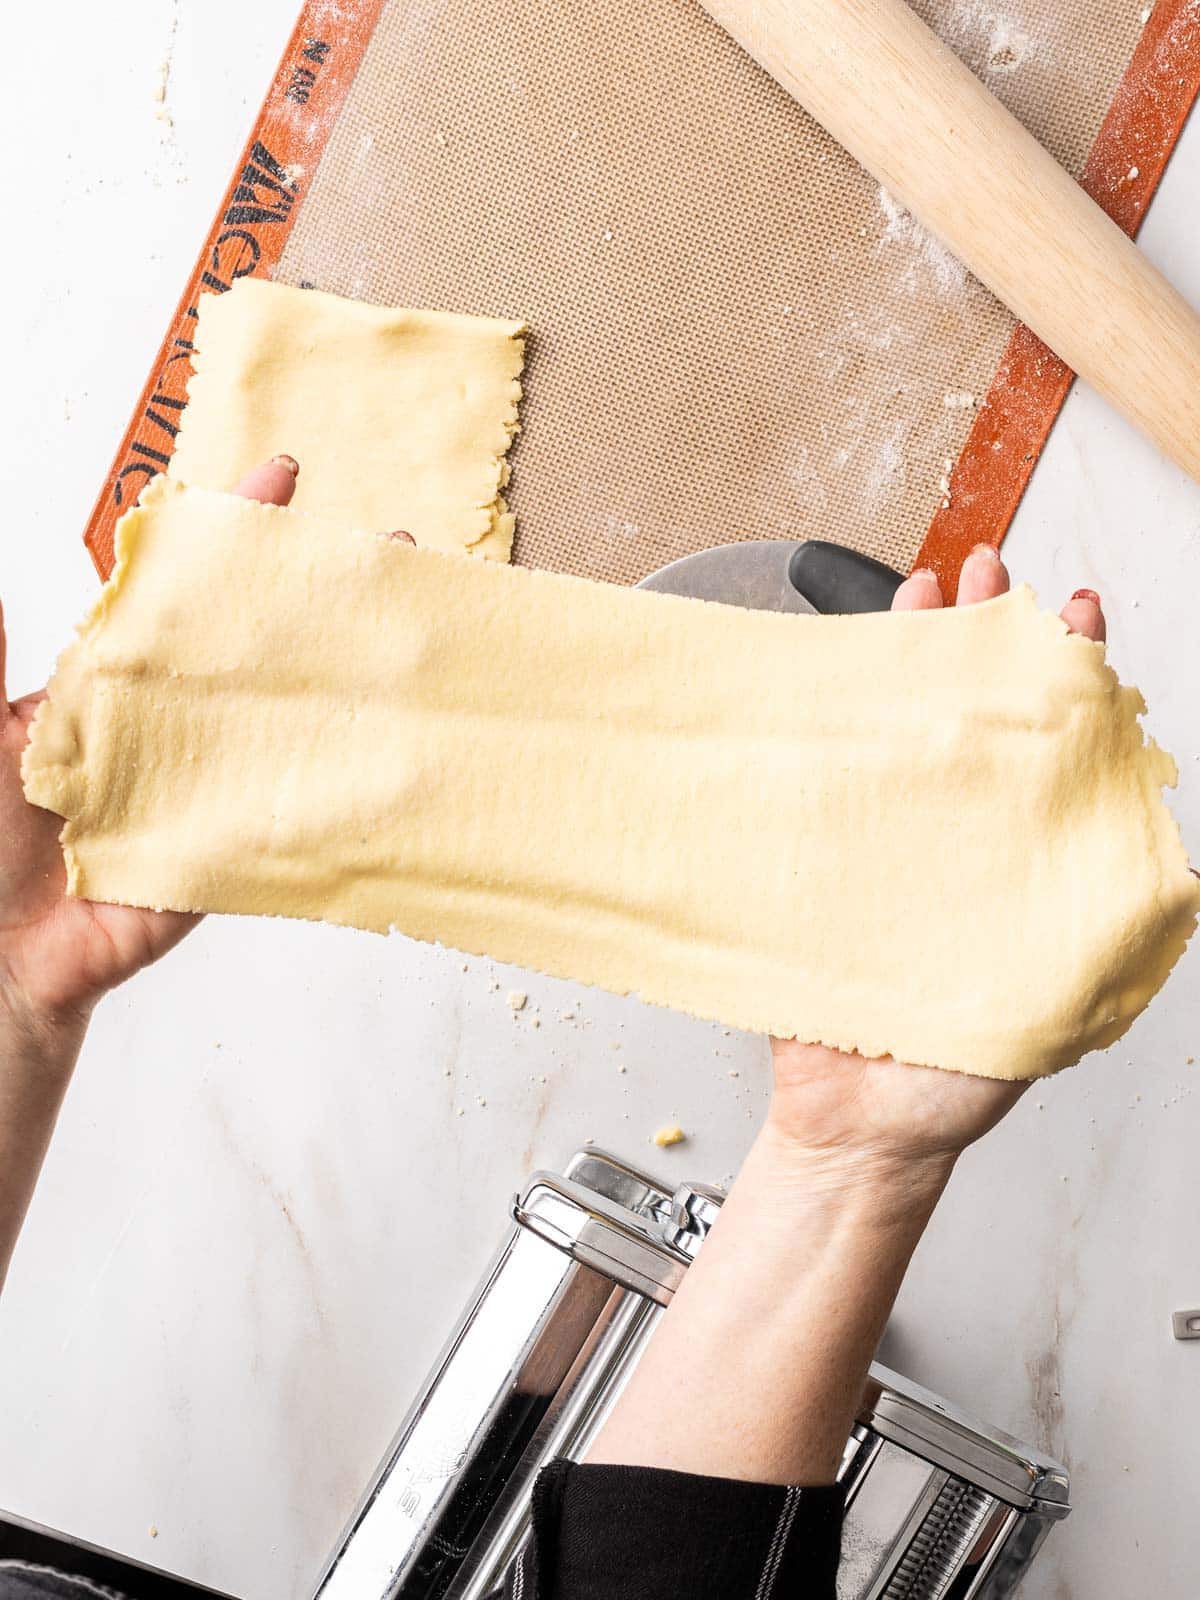 Stretched out pasta dough.